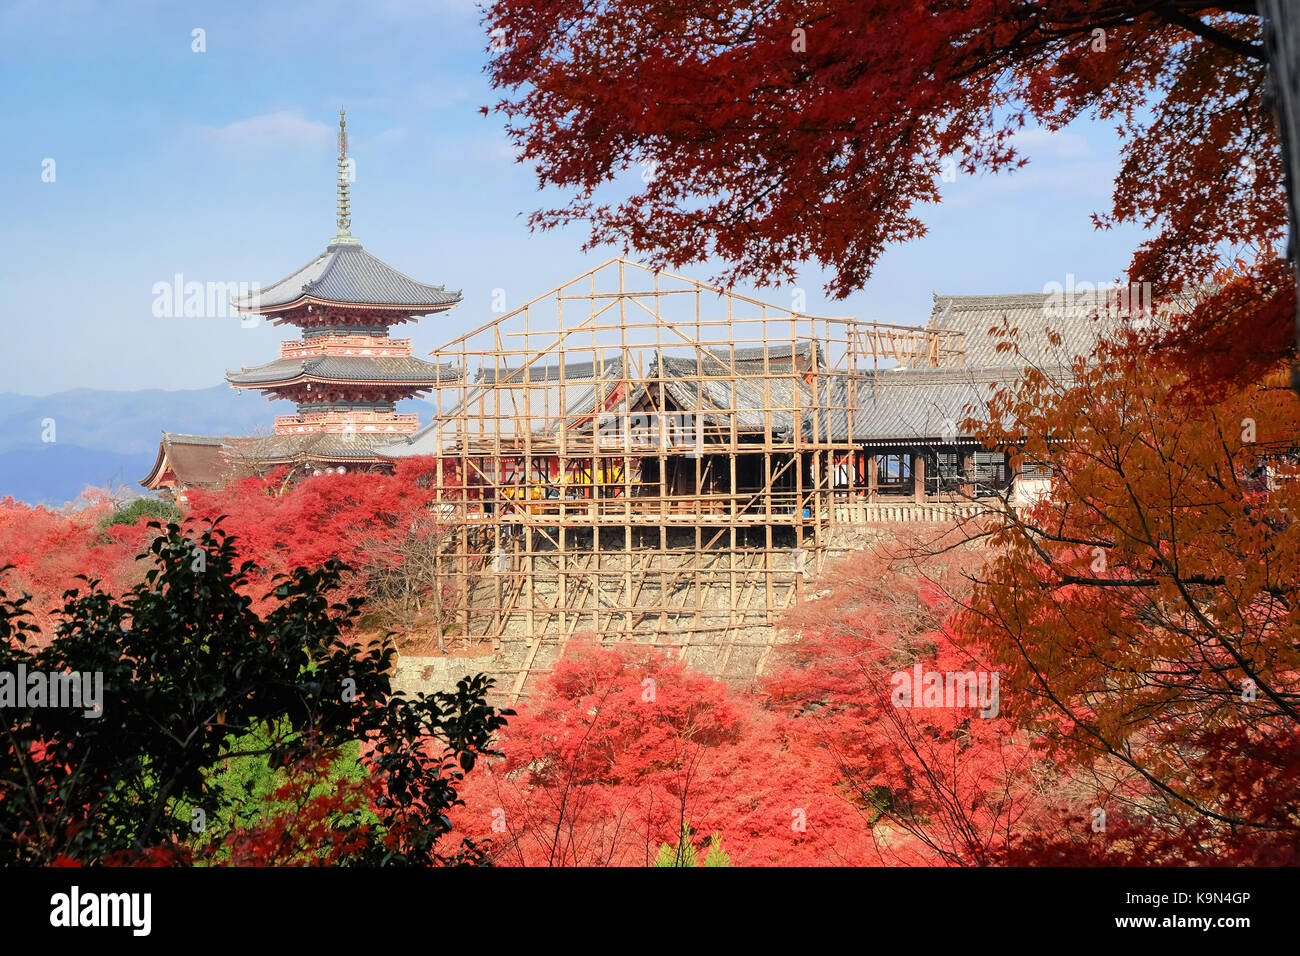 Kiyomizu-dera temple with red maple leaves under renovation period Stock Photo